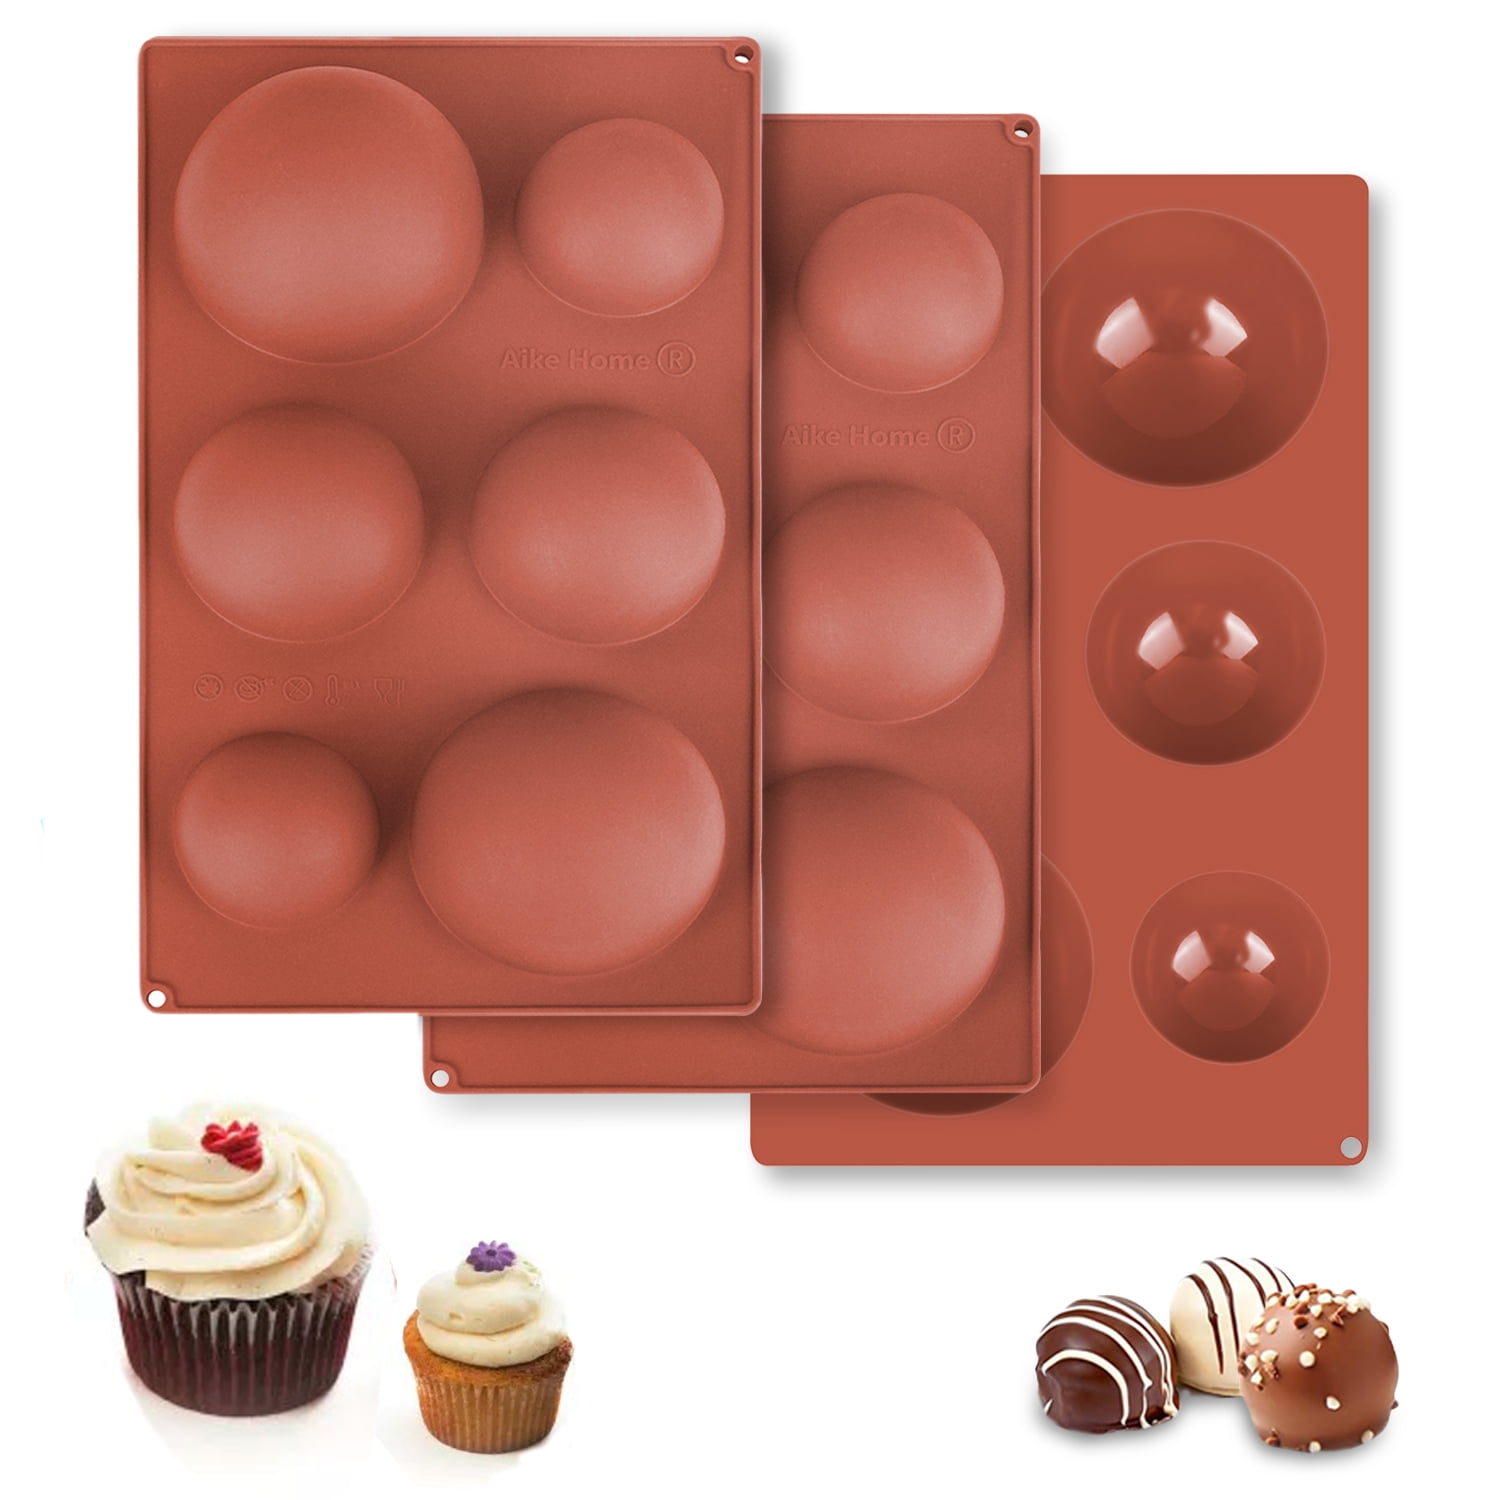 6 Cavity Half Ball Sphere Cake Silicone Molds Chocolate Baking Pans Moulds Sugar 